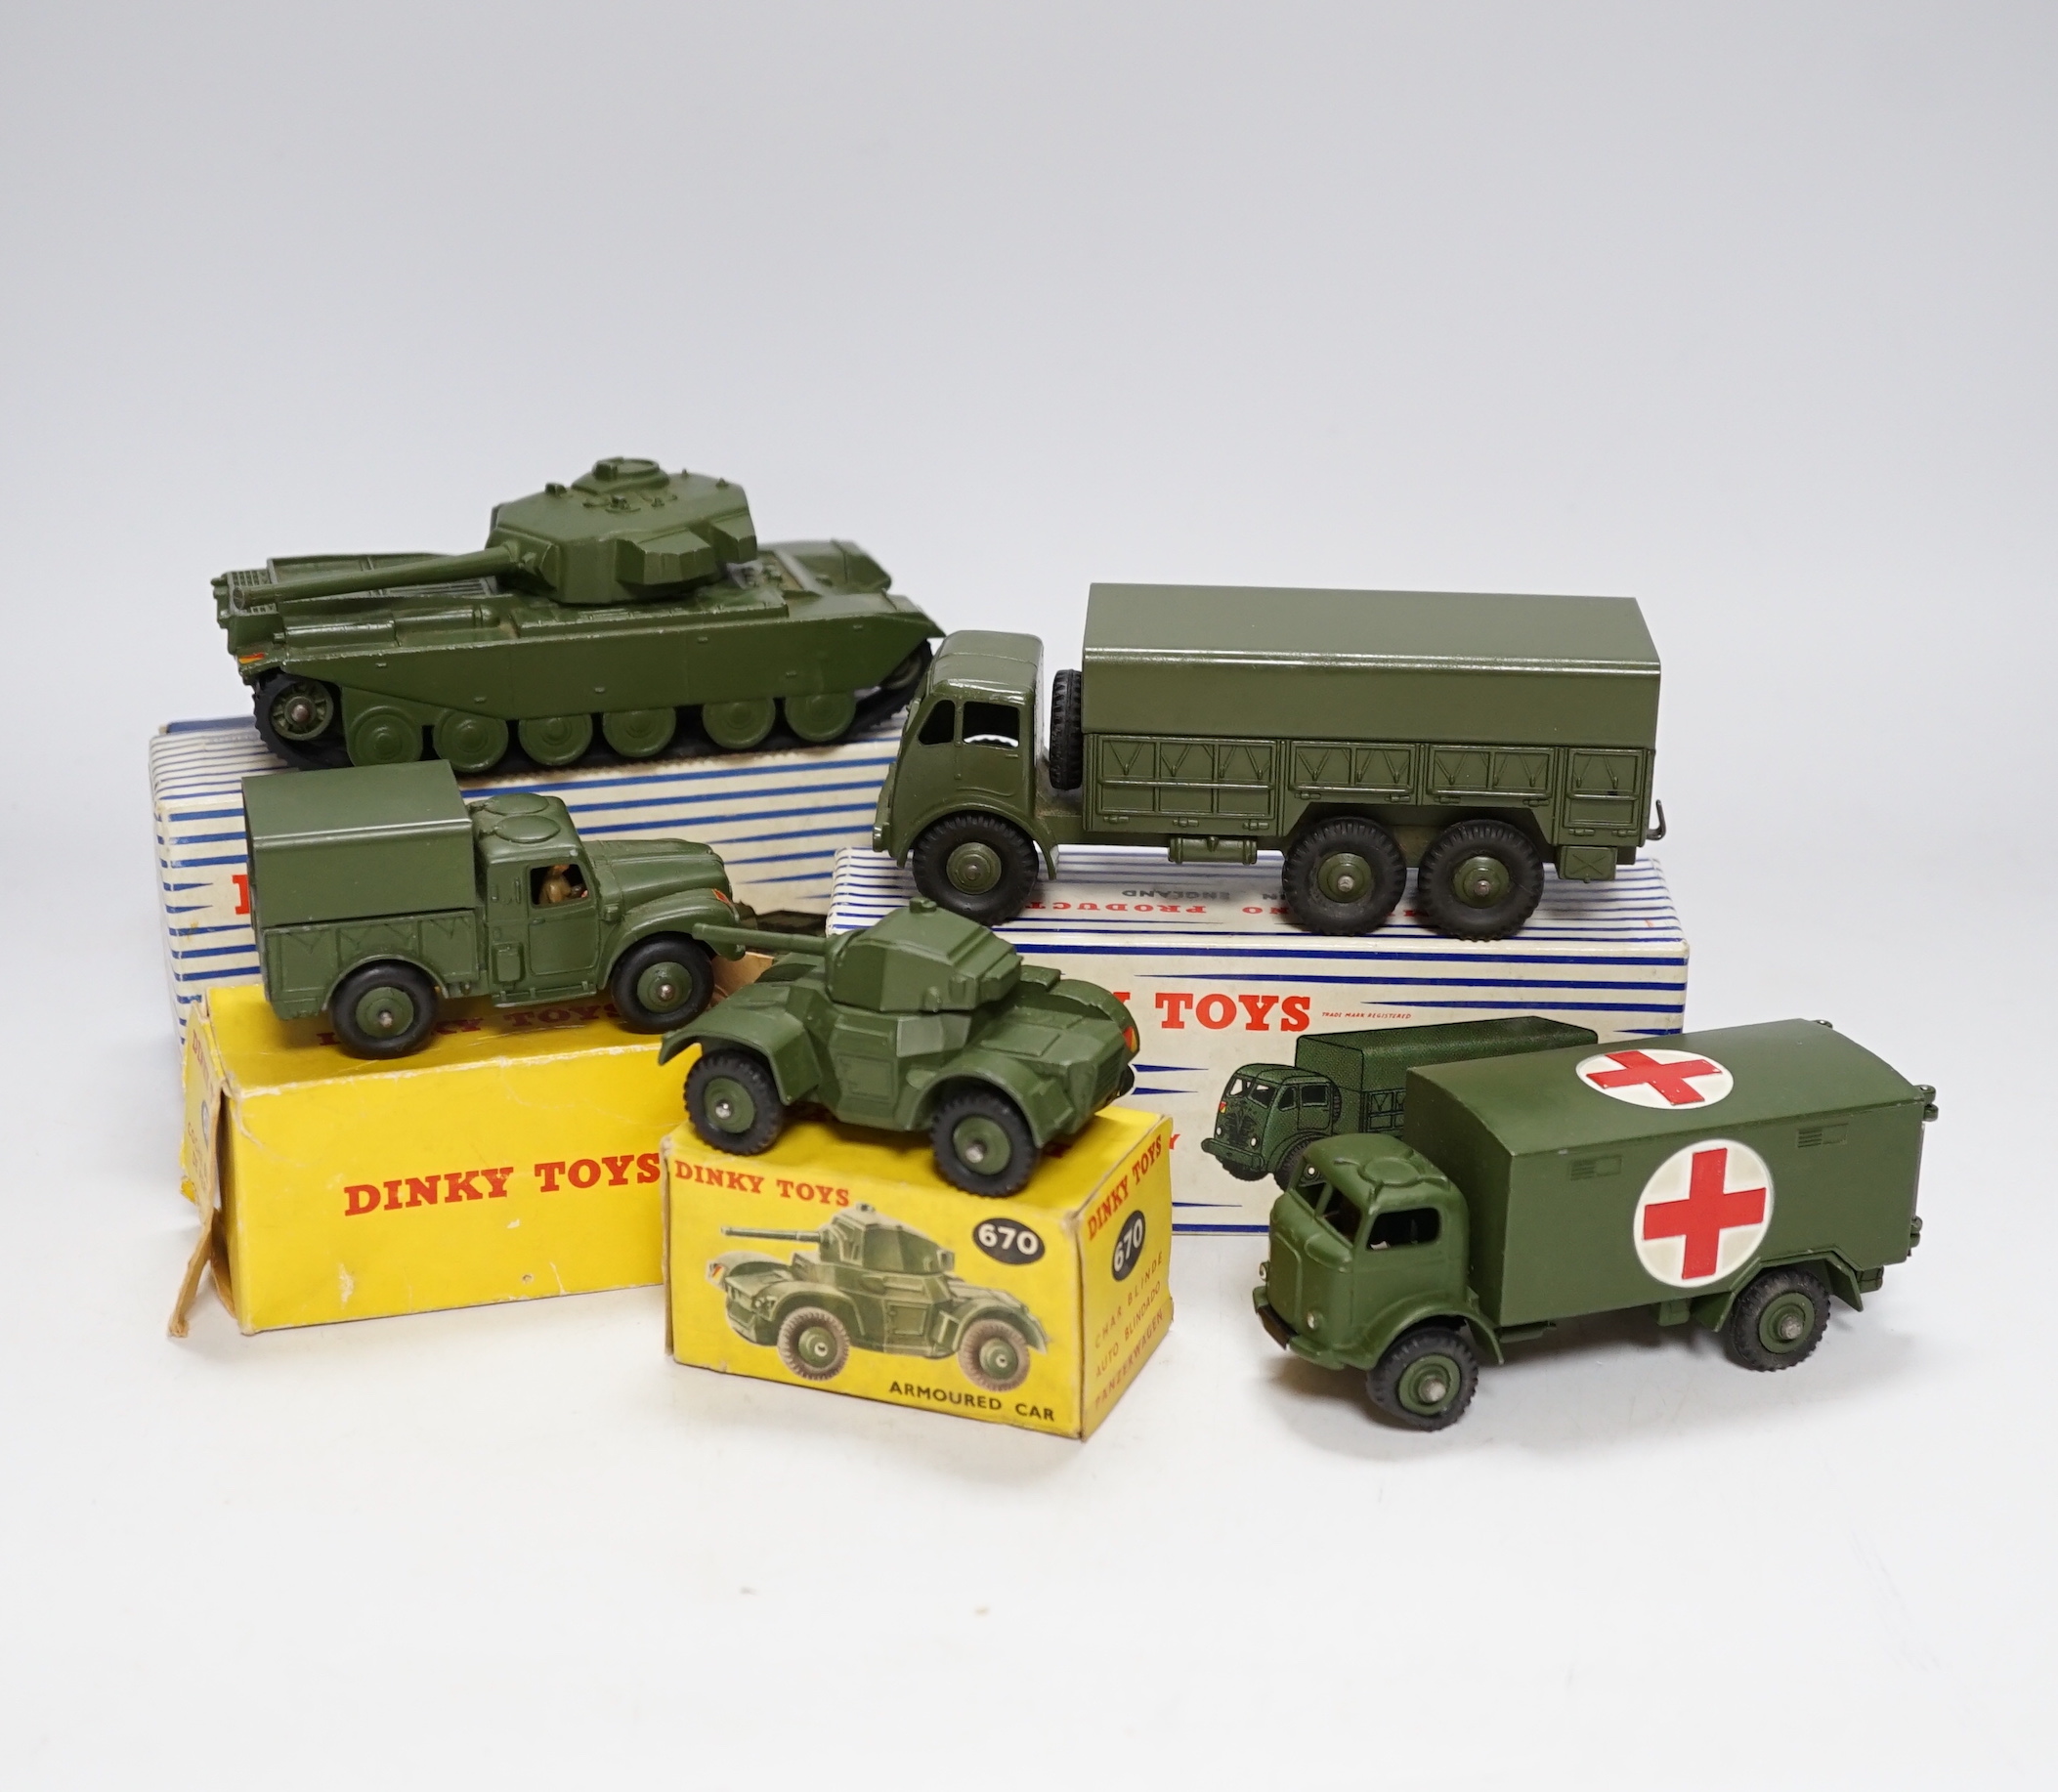 Eleven boxed military Dinky Toys